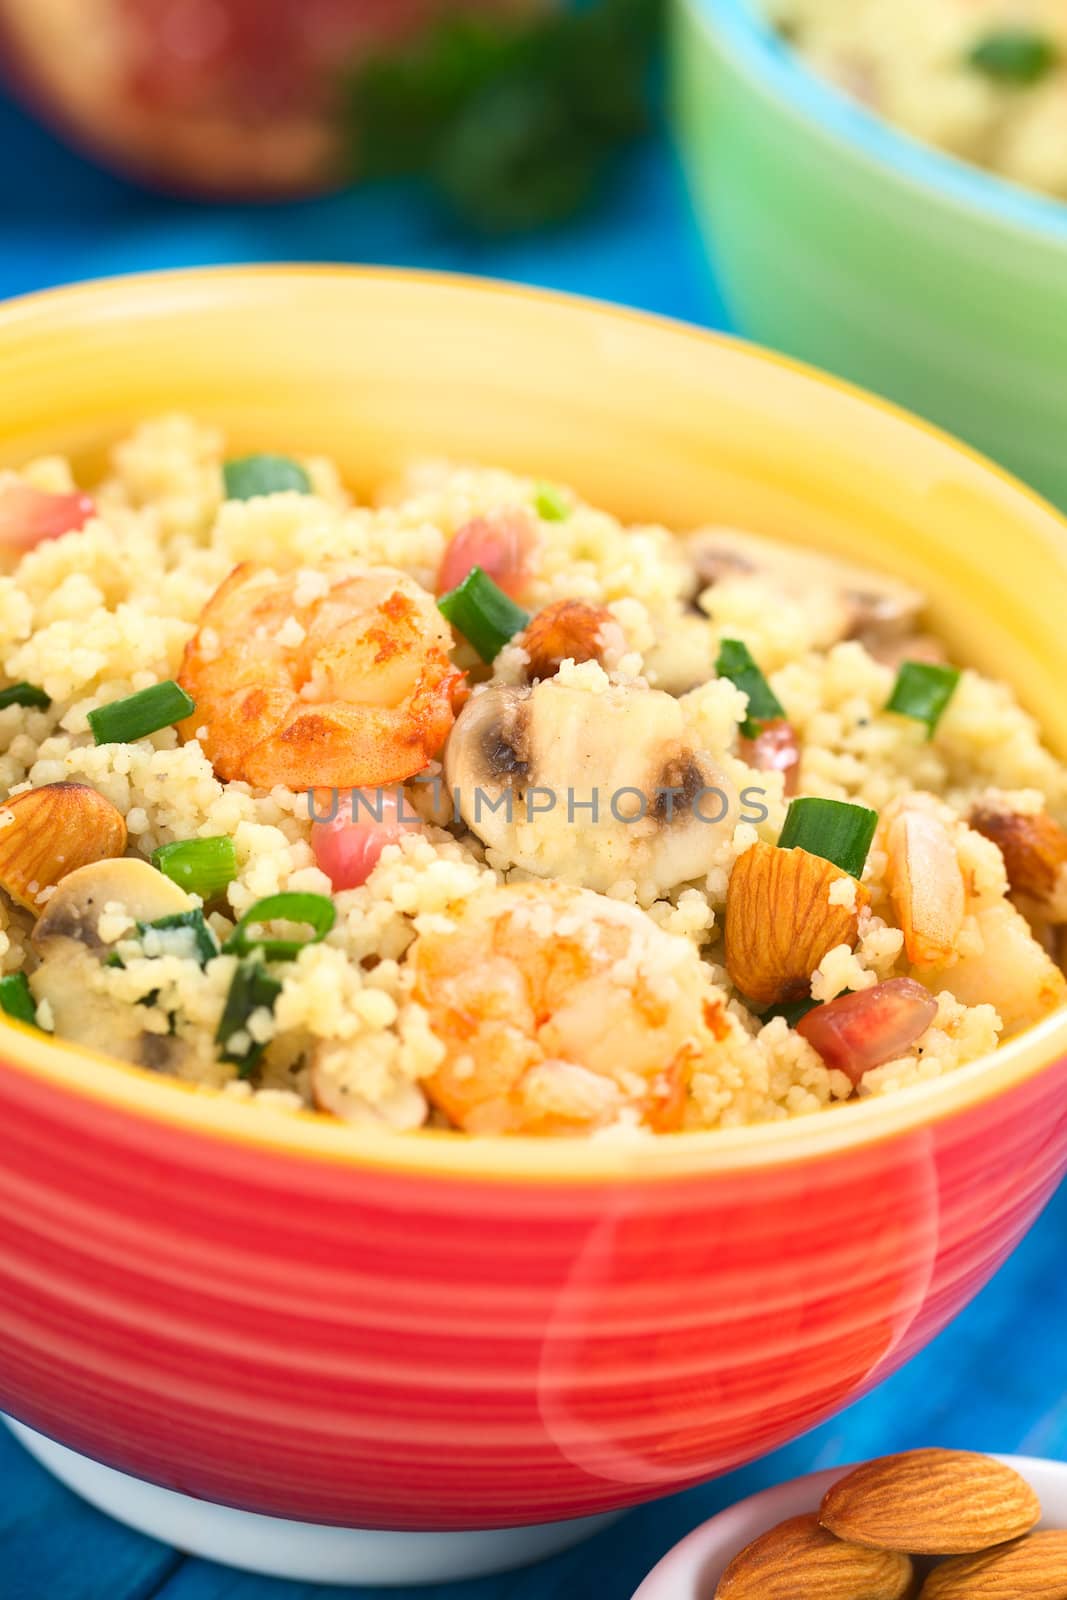 Couscous dish with shrimps, mushroom, almond, pomegranate seeds and green onion served in colorful bowl (Selective Focus, Focus on the tail of the shrimp on the top of the meal and on the mushroom slice next to it) 